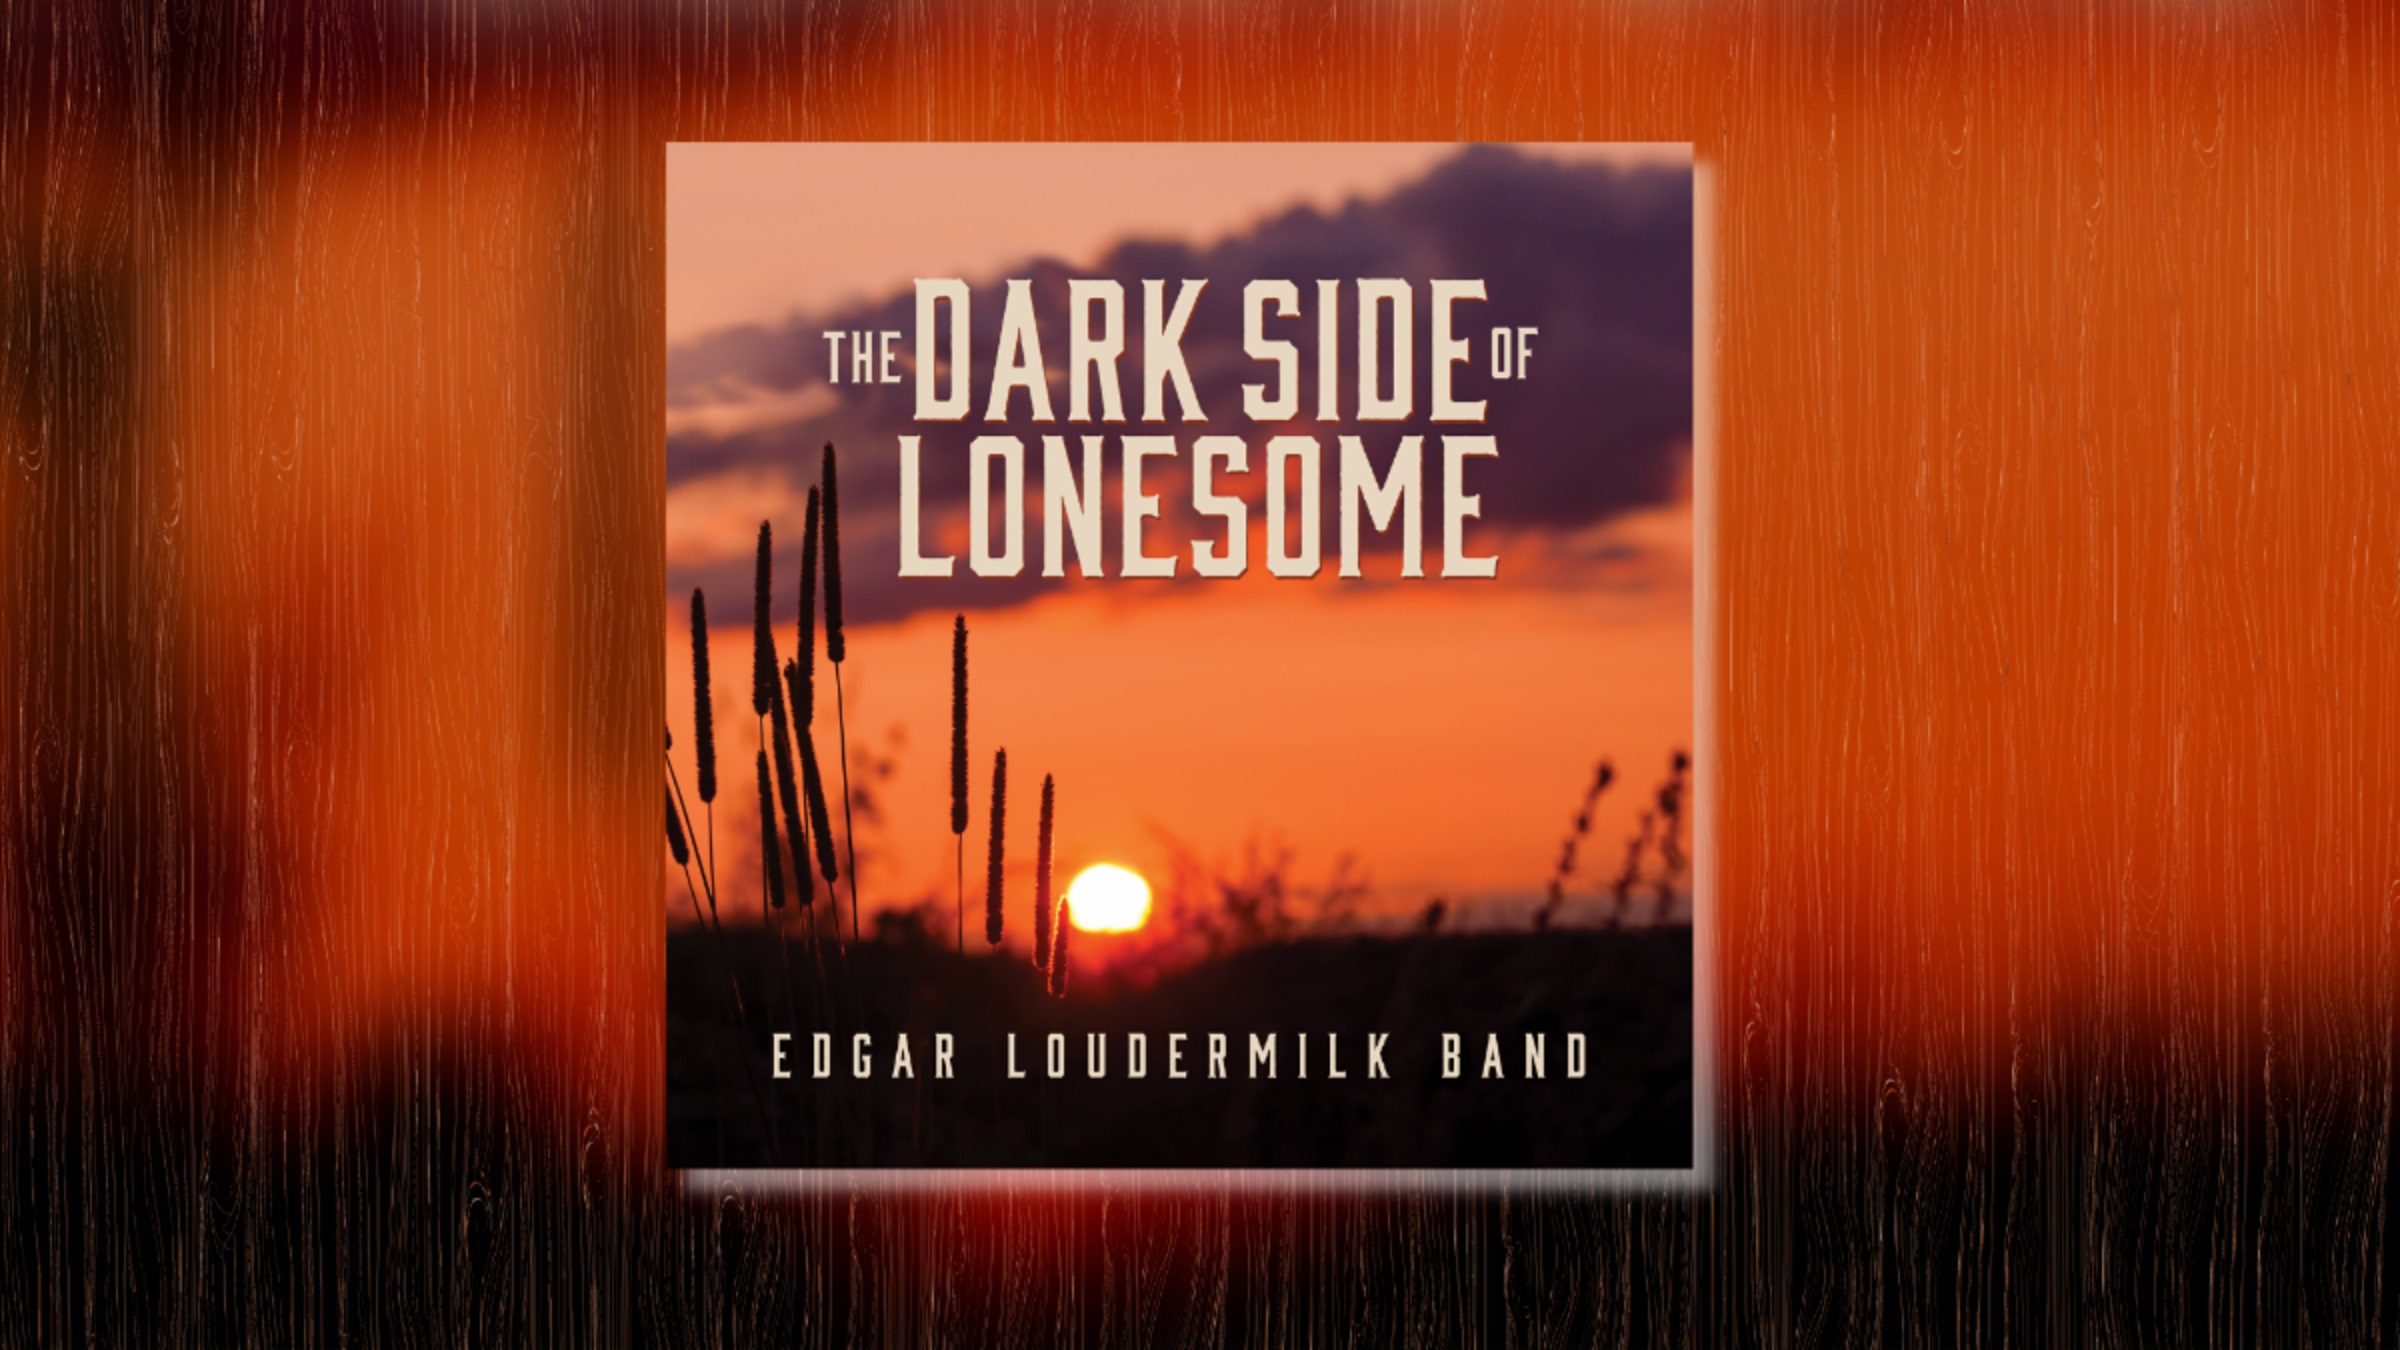 New Music From The Edgar Loudermilk Band